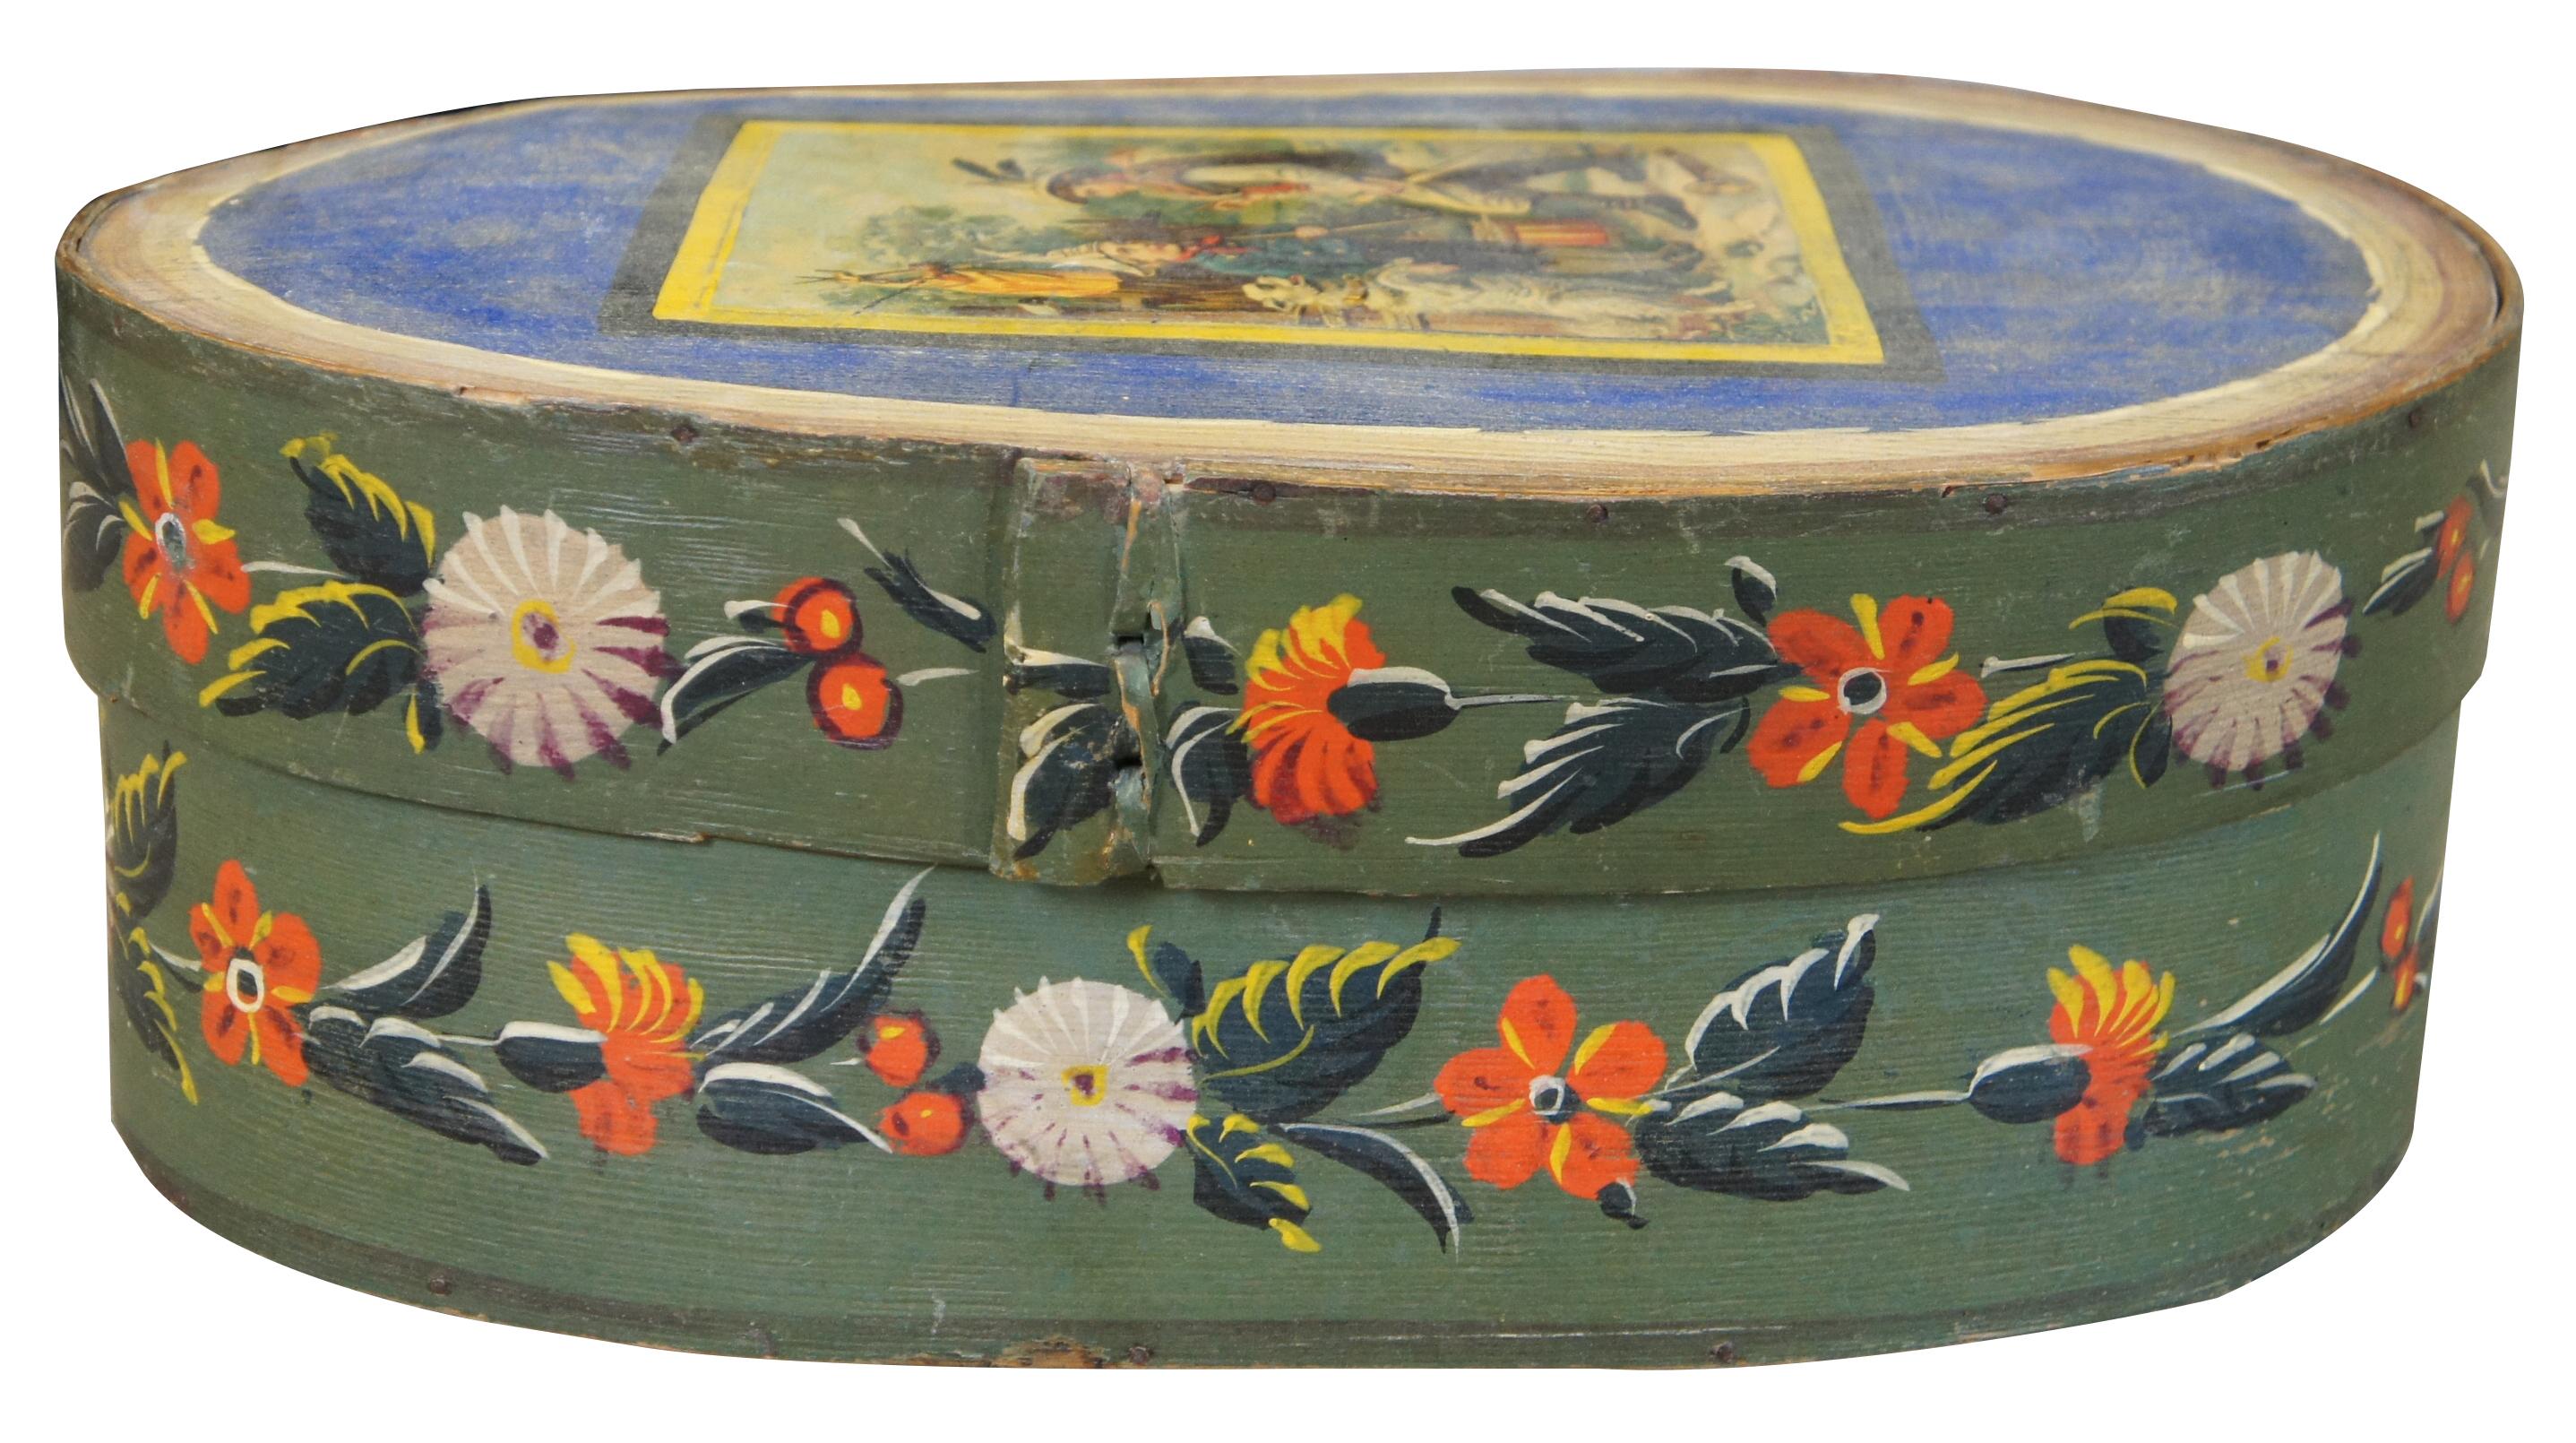 Antique 19th century bentwood Folk Art bride's box featuring painted Colonial scene of the Little Recuit; a boy and his dog standing outside of a fort taking orders from the child general. Accented with floral banding. Measure: 17